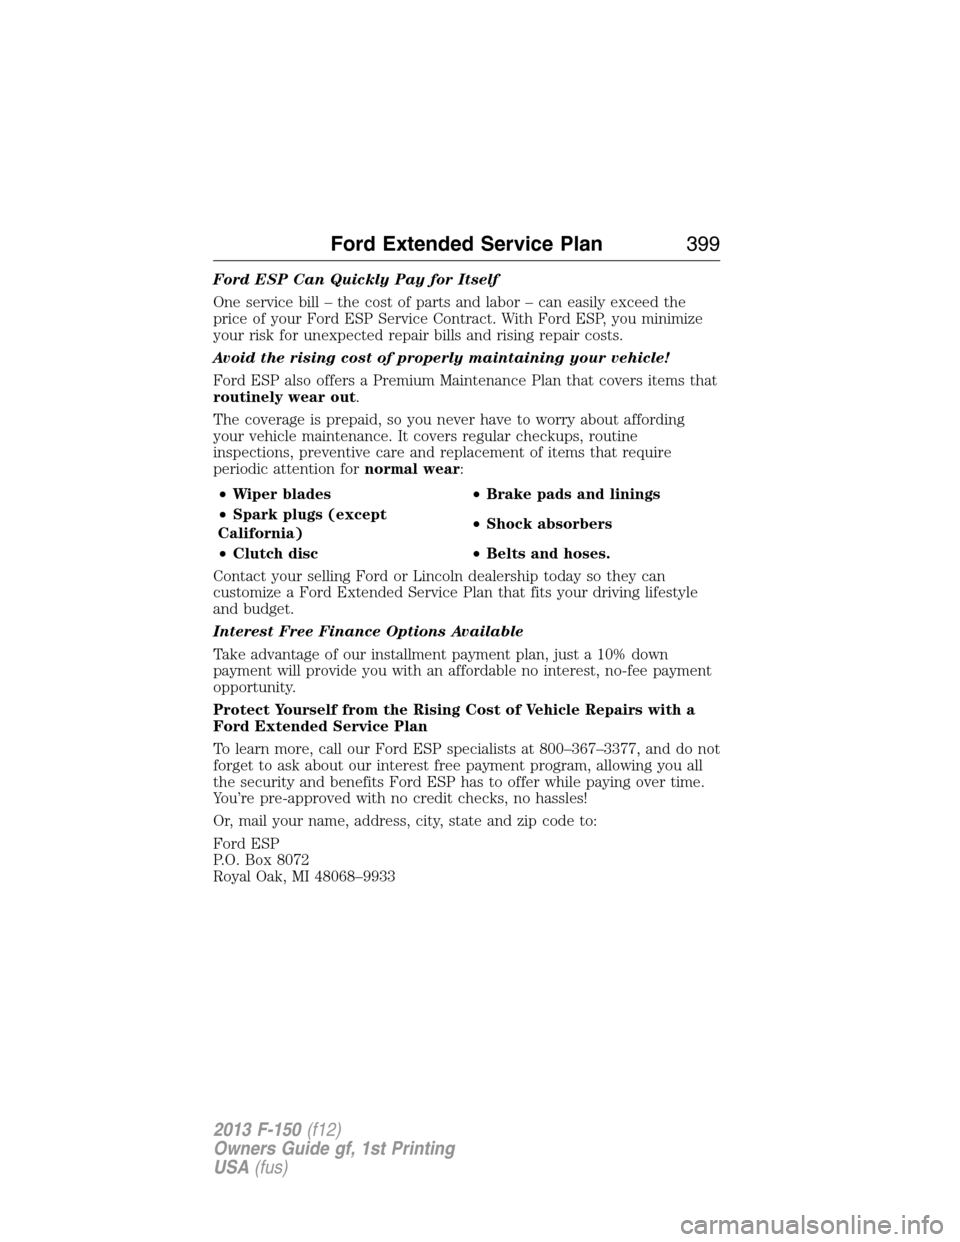 FORD F150 2013 12.G Owners Manual Ford ESP Can Quickly Pay for Itself
One service bill – the cost of parts and labor – can easily exceed the
price of your Ford ESP Service Contract. With Ford ESP, you minimize
your risk for unexpe